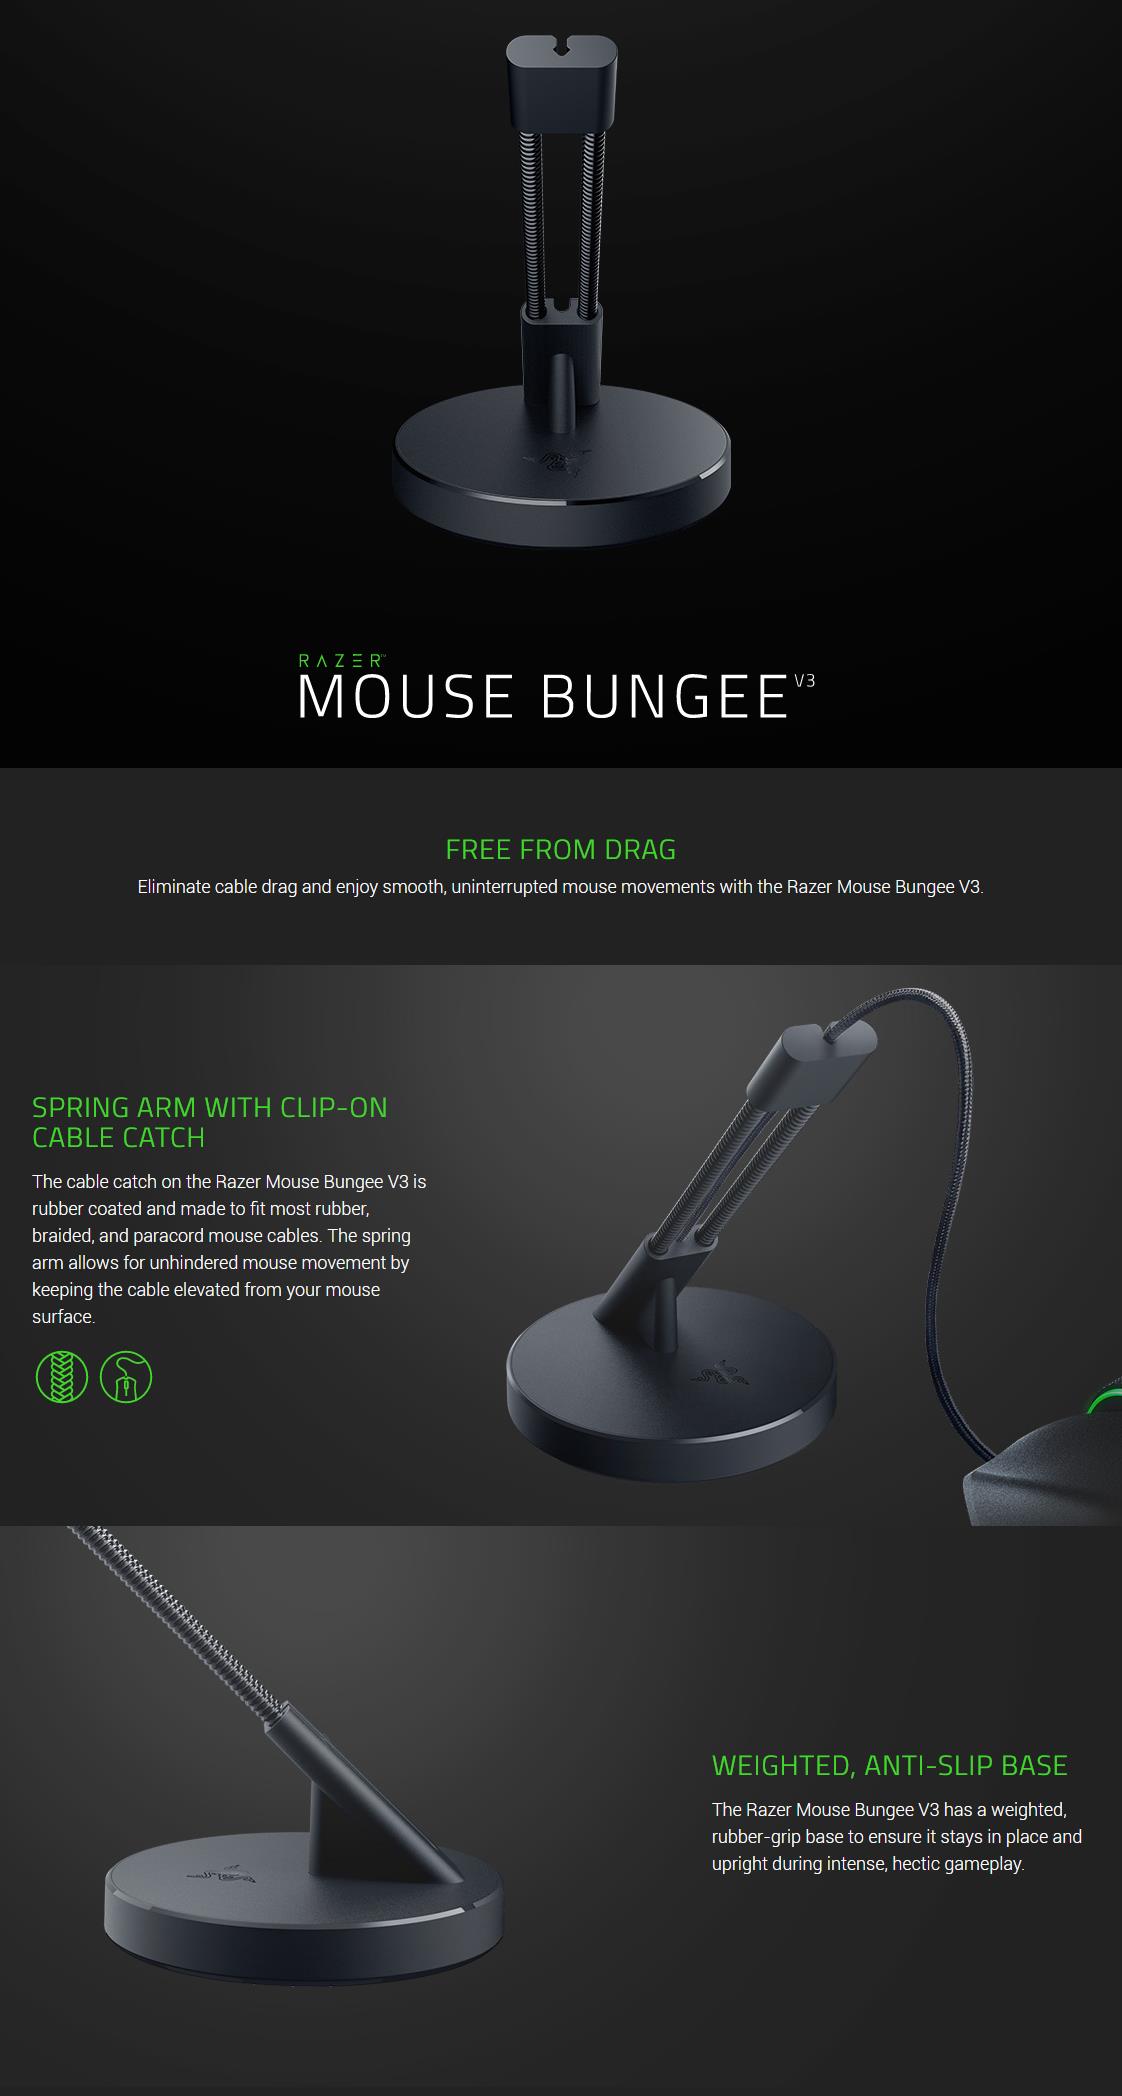 A large marketing image providing additional information about the product Razer Mouse Bungee V3 - Additional alt info not provided